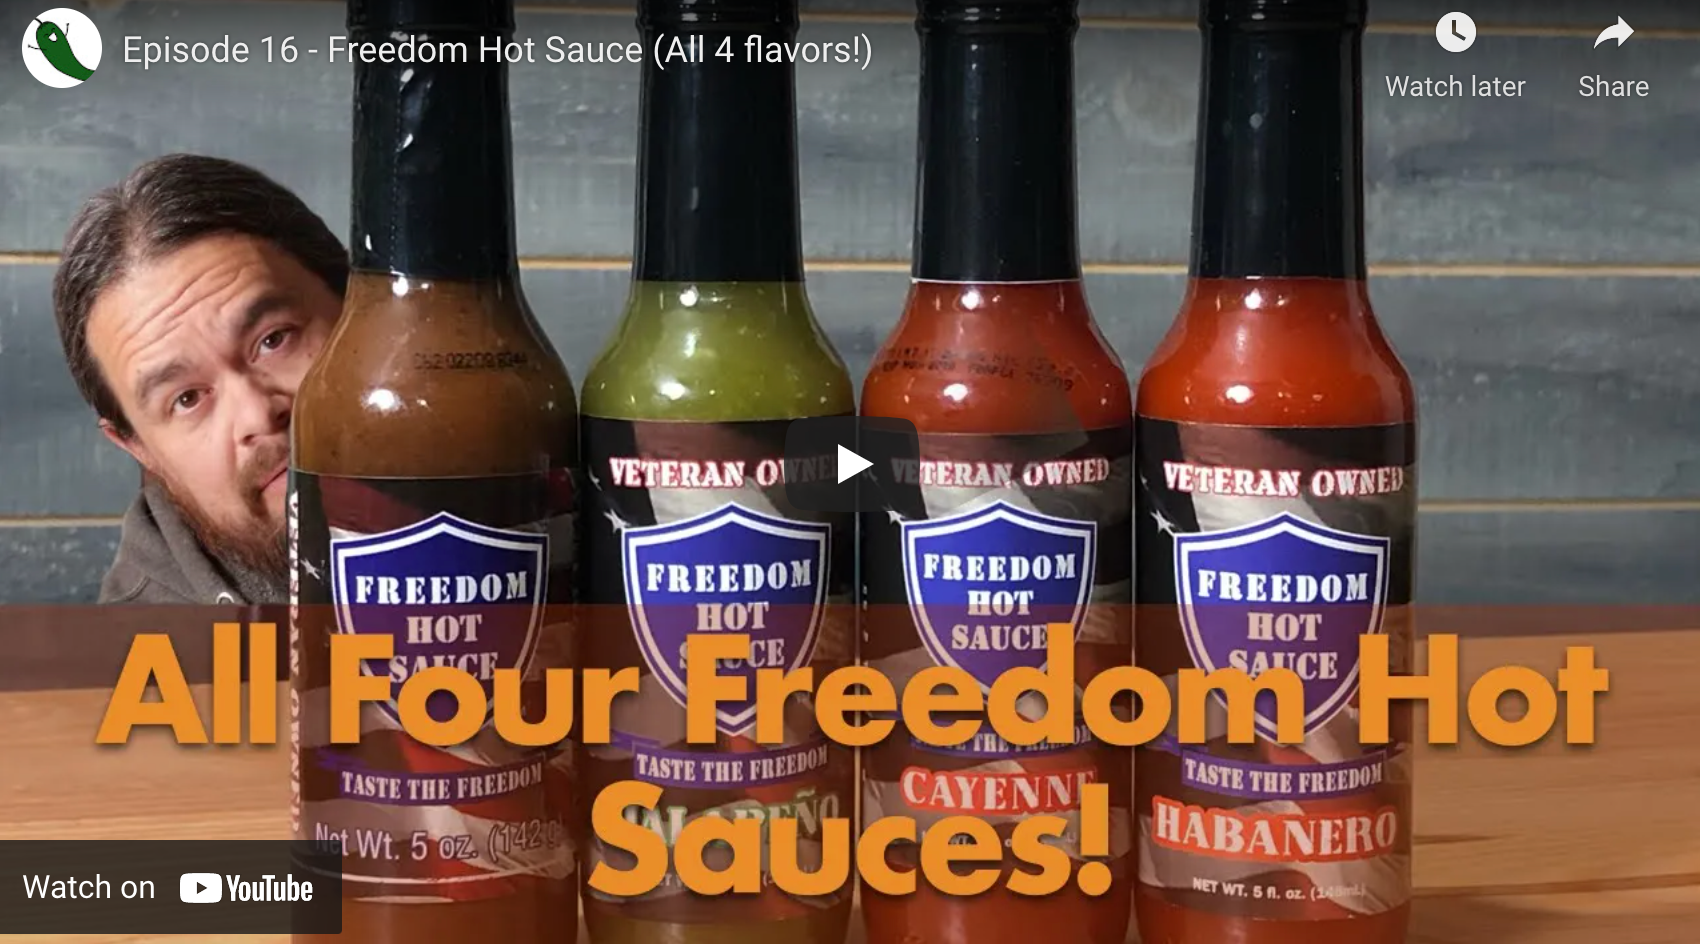 That Hot Sauce Guy - Episode 16 - Freedom Hot Sauce (All 4 flavors!)